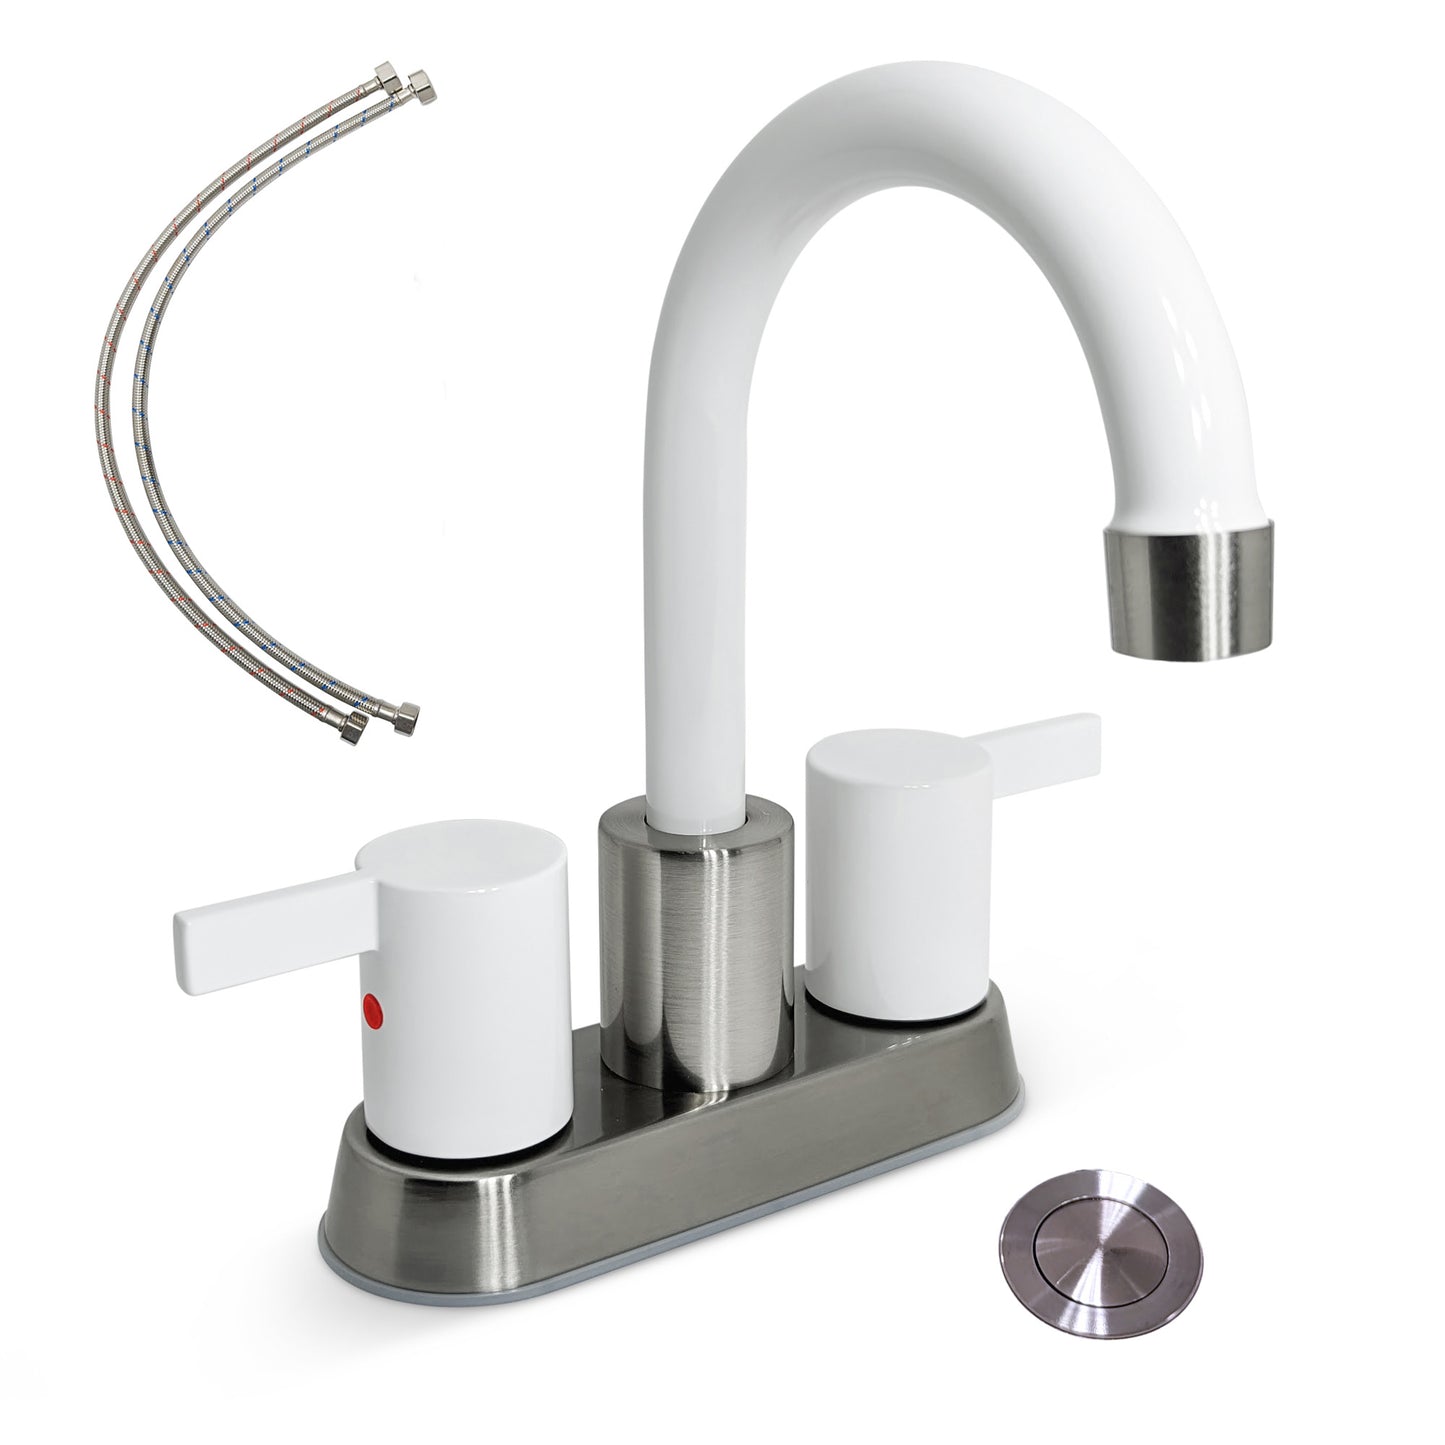 Modern white and brushed nickel 2 handle bathroom faucet with white pop-up drain and hoses.